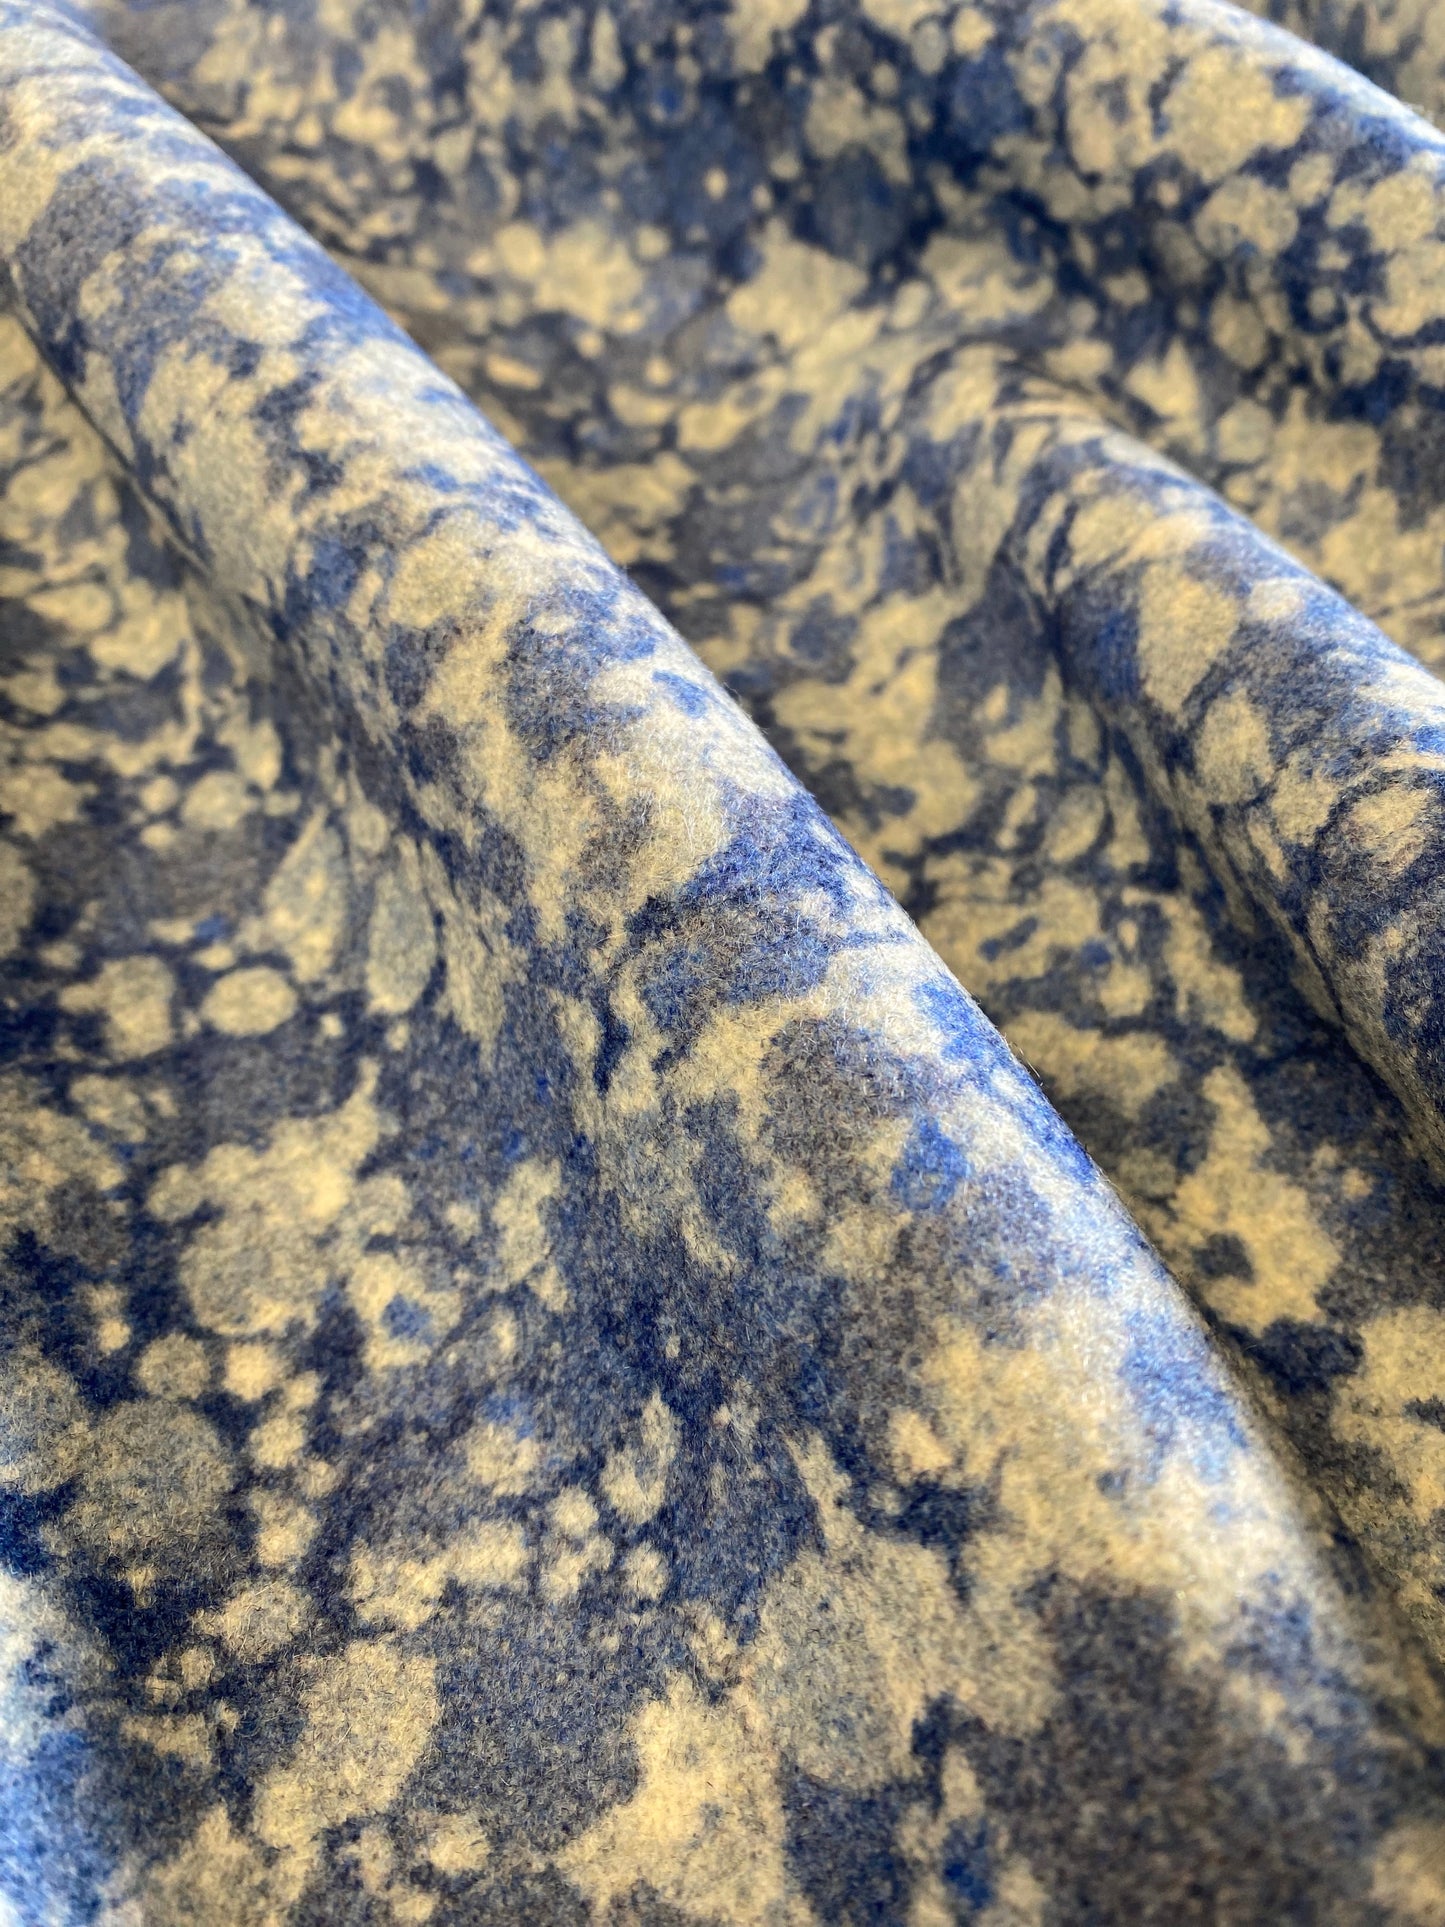 In Stock: Printed Marbled Wool Fabric - 'Ditzy' Col: Blue Daze - 100% Wool (1m x 1m)